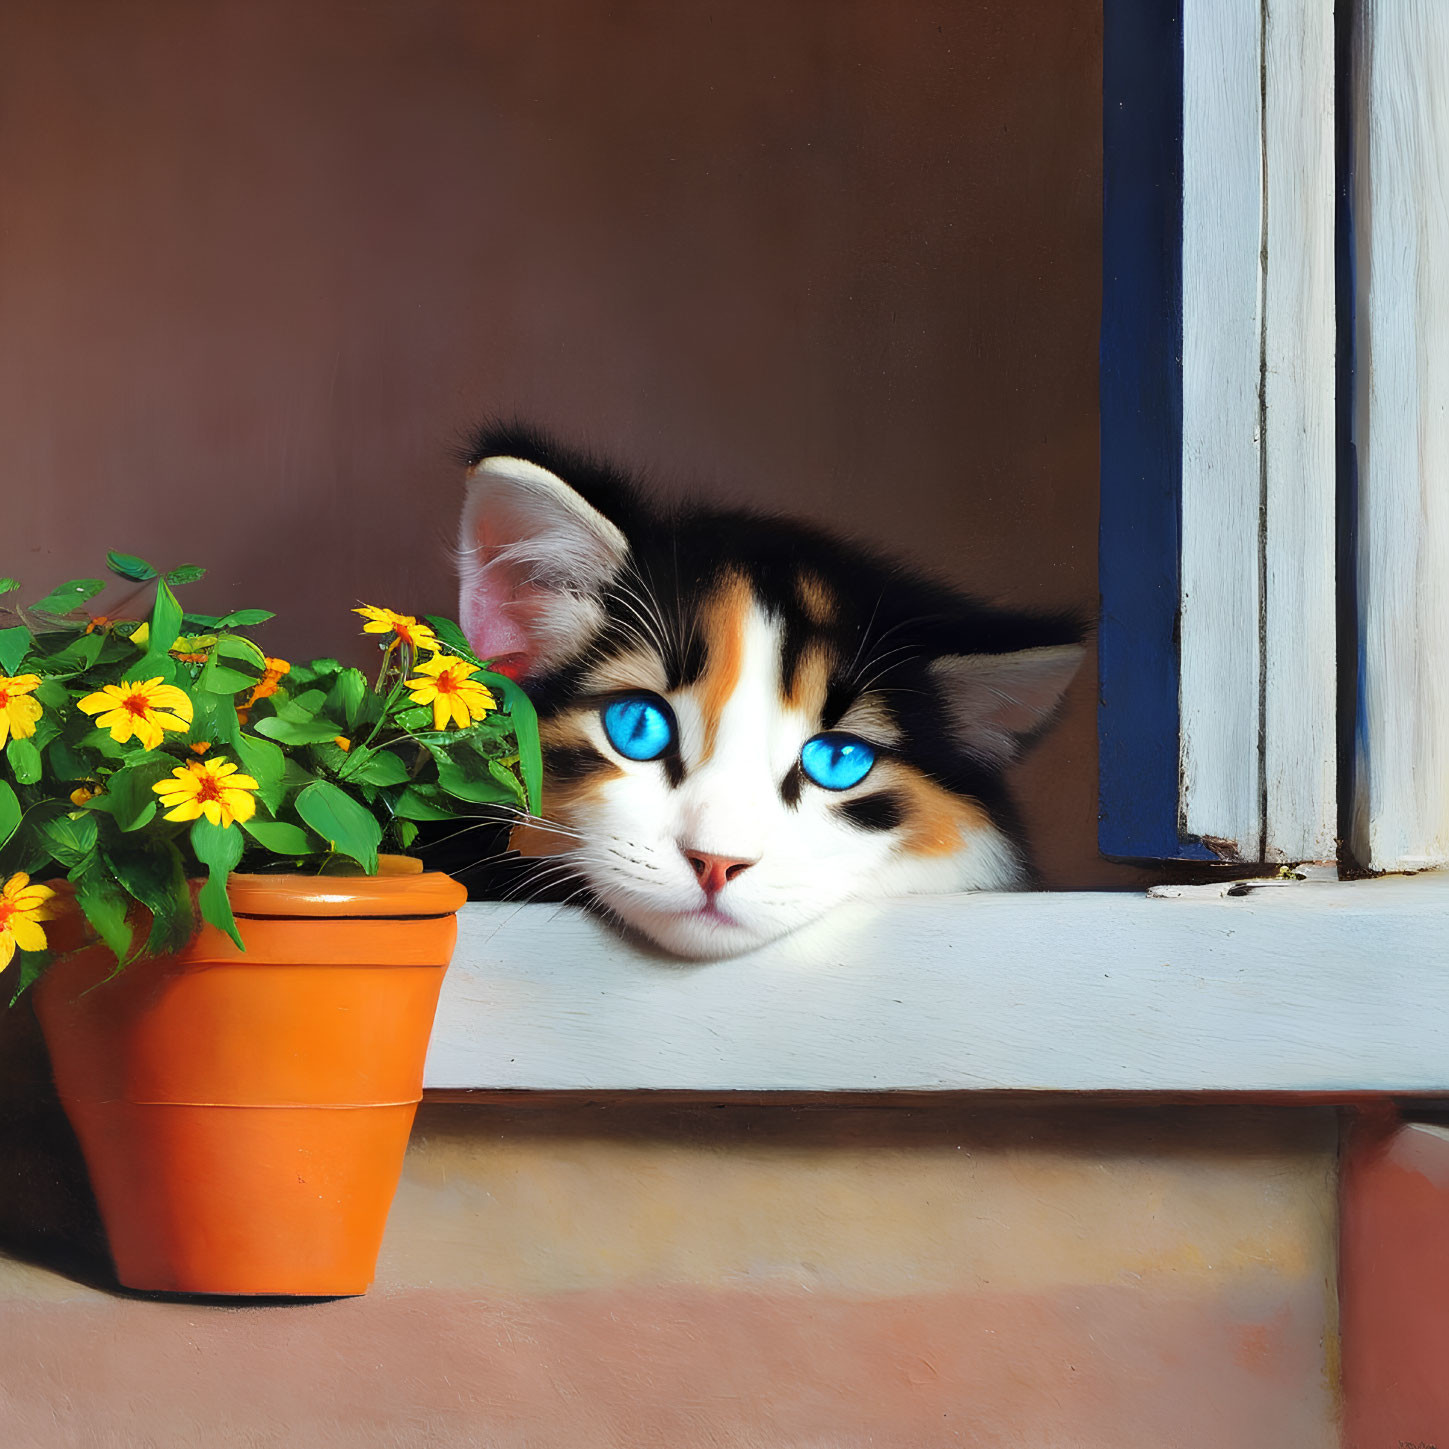 Calico Cat with Striking Blue Eyes by Windowsill and Yellow Flowers